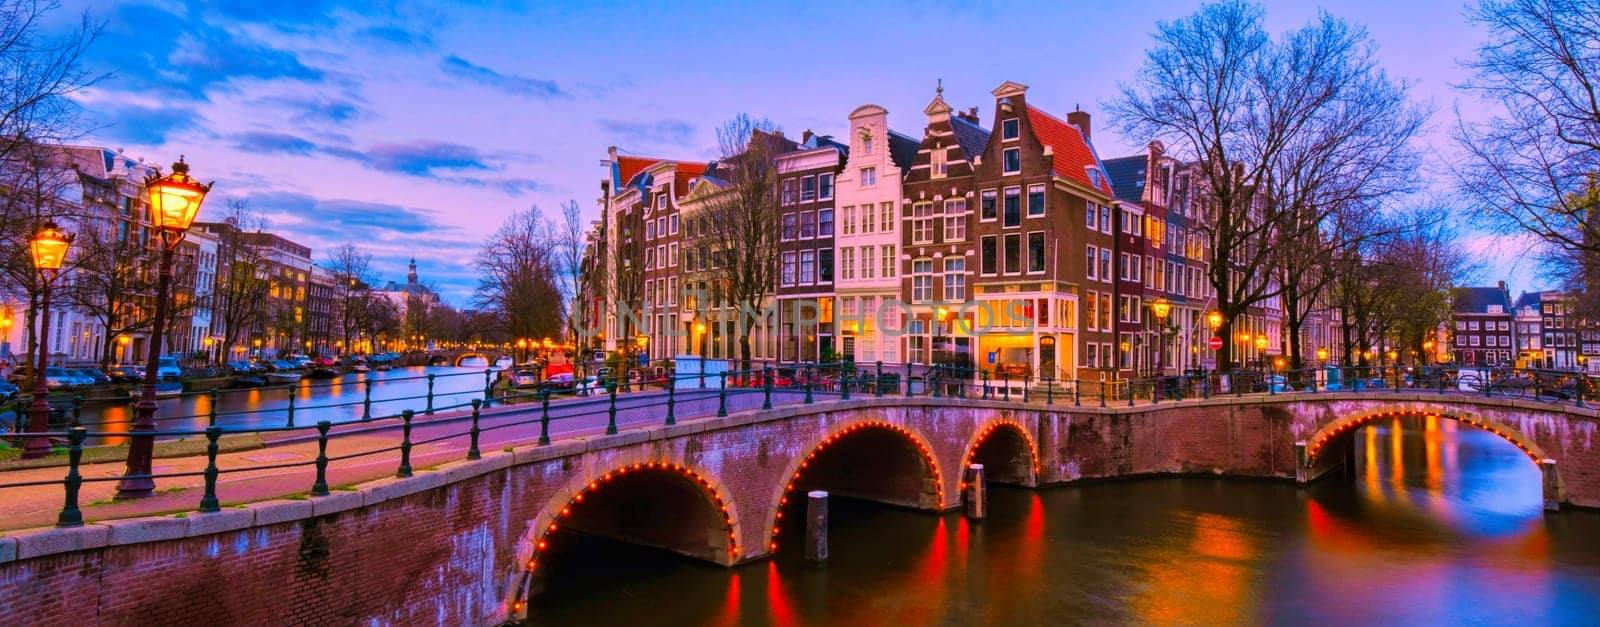 Amsterdam Canal in the evening during sunset, Amsterdam Canal bridge with old historical houses at night in the Netherlands